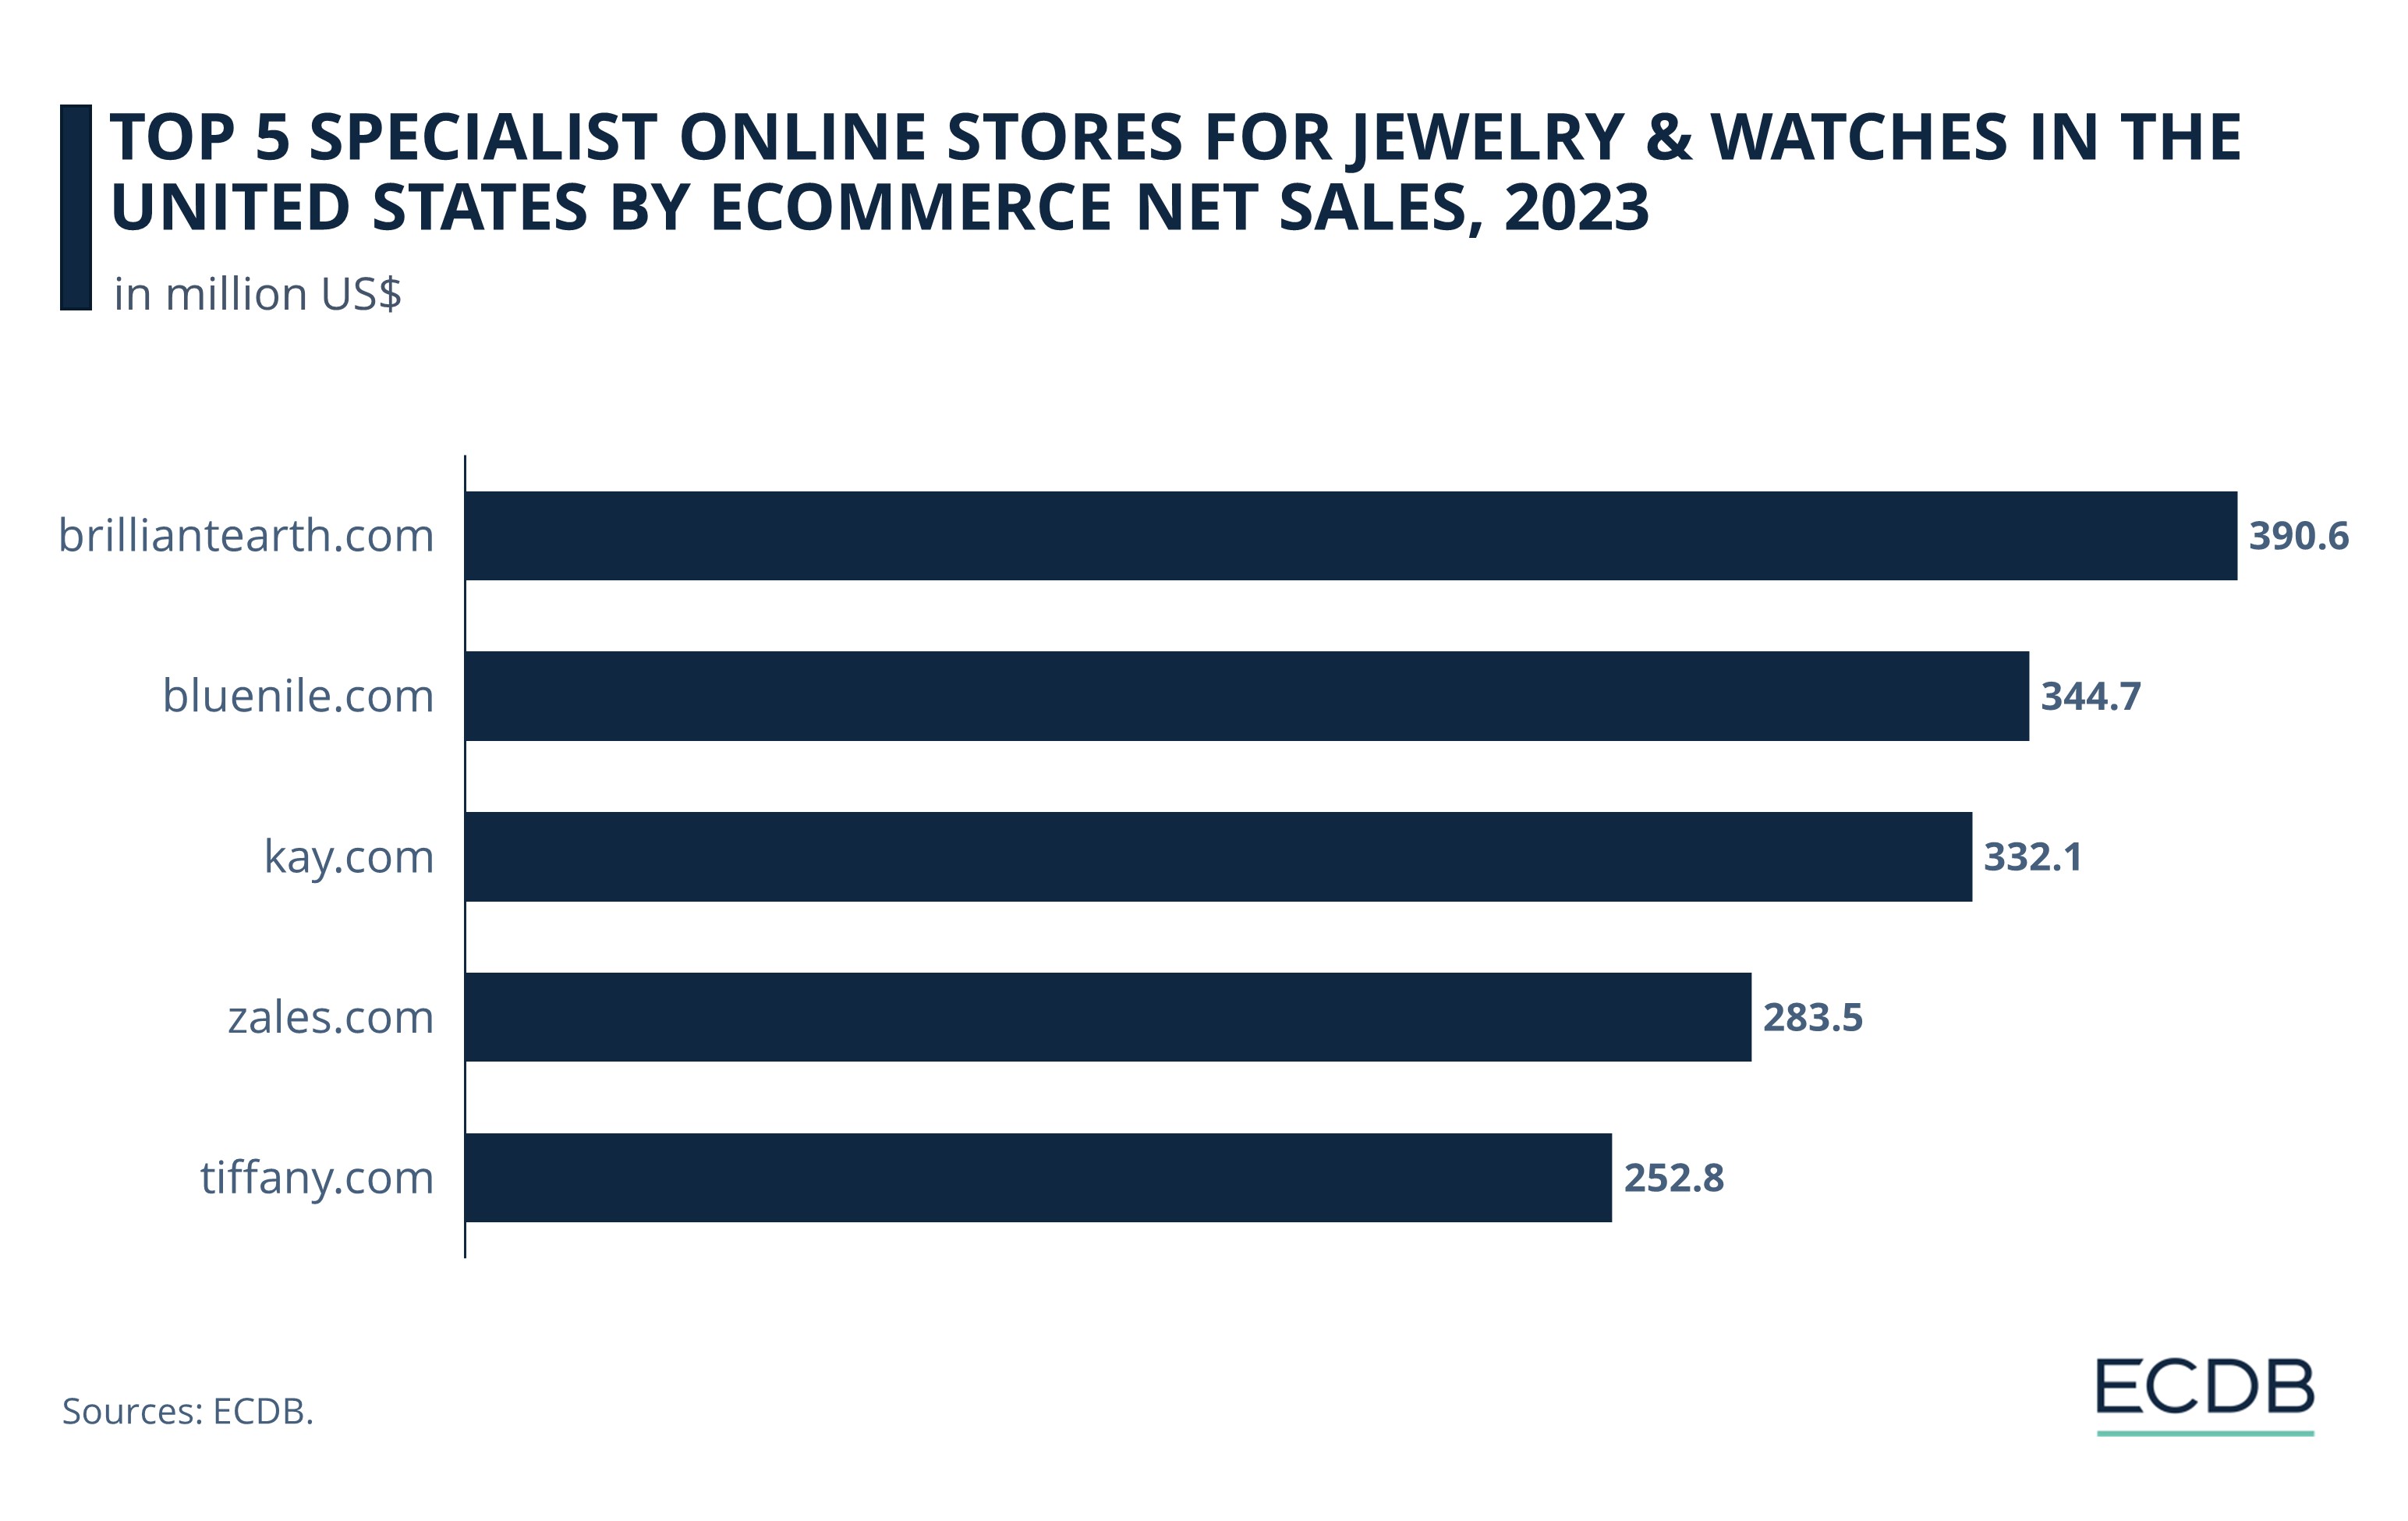 Top 5 Specialist U.S. Online Stores for Jewelry & Watches, 2023